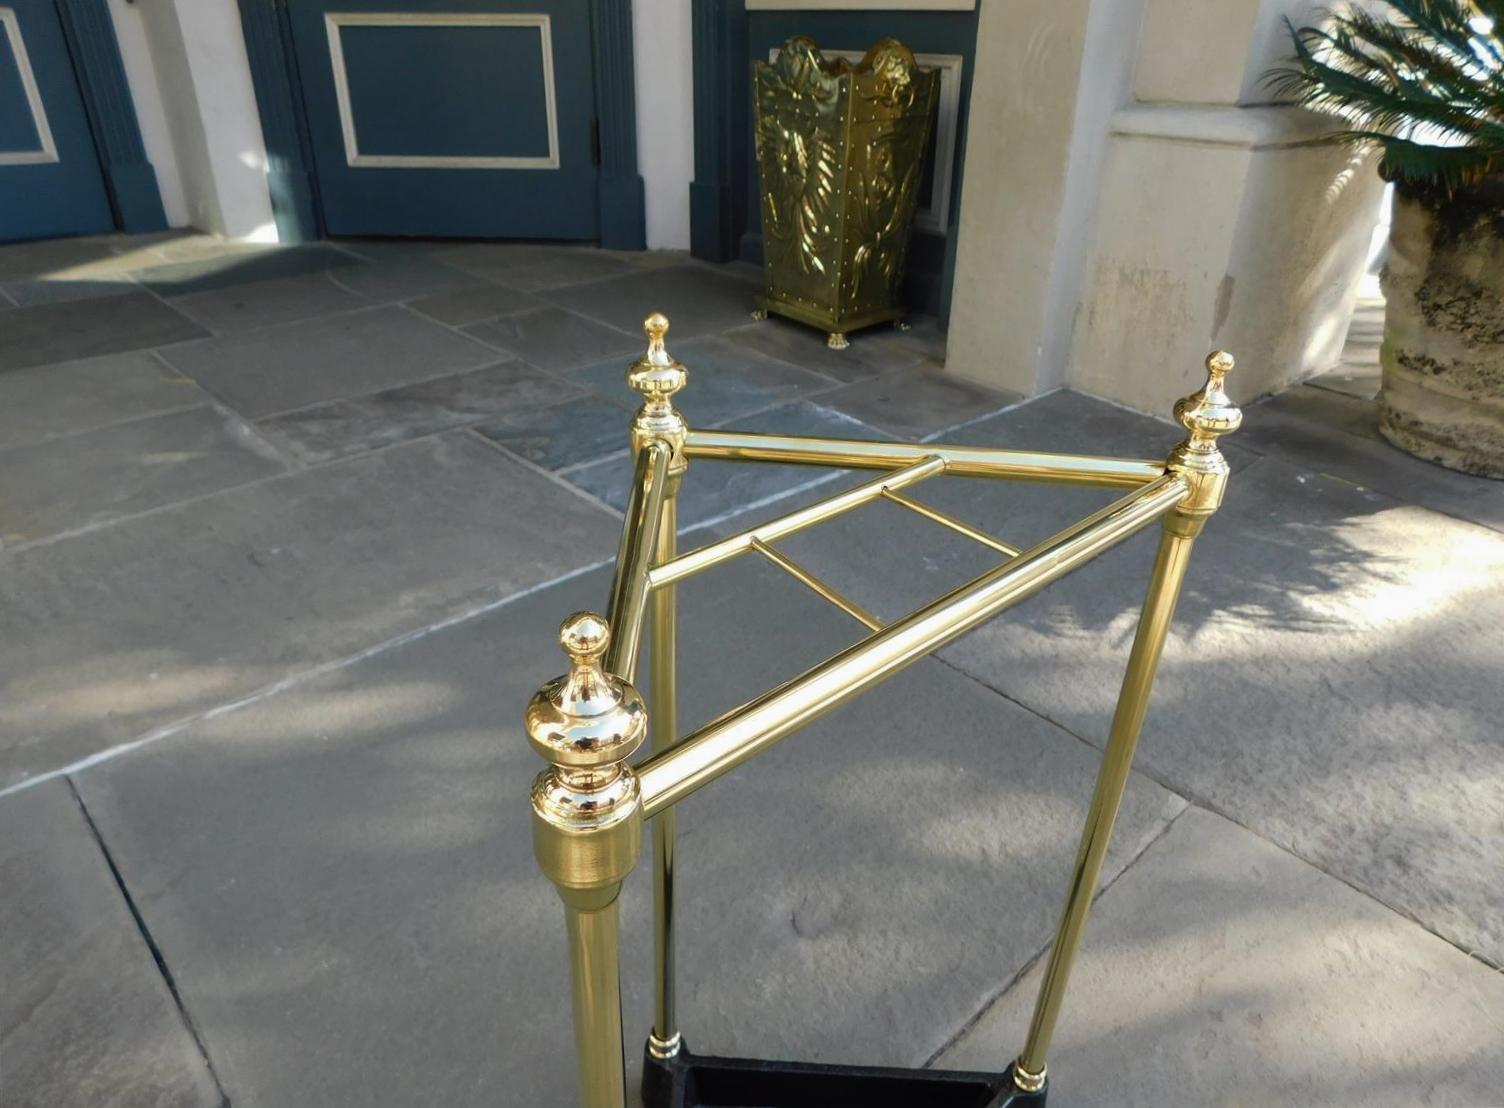 American Triangular Brass & Iron Urn Finial Four Slotted Umbrella Stand, C. 1880 For Sale 1